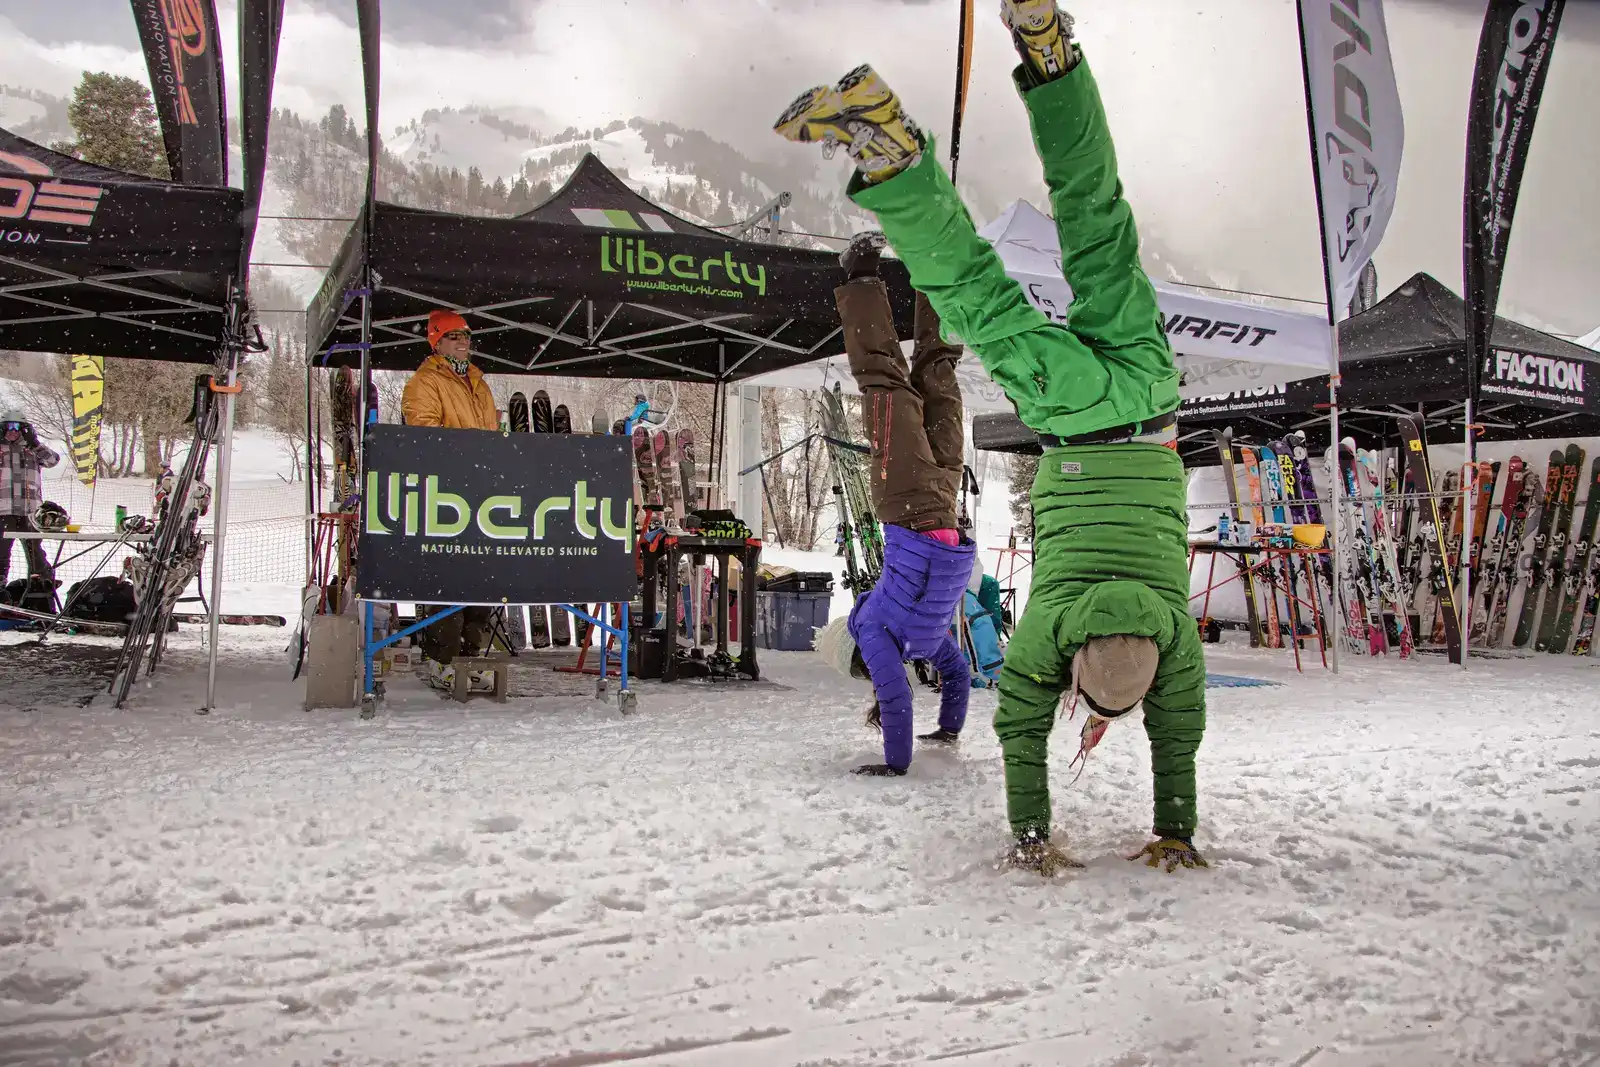 Skiers do hand stands at a ski resort event.